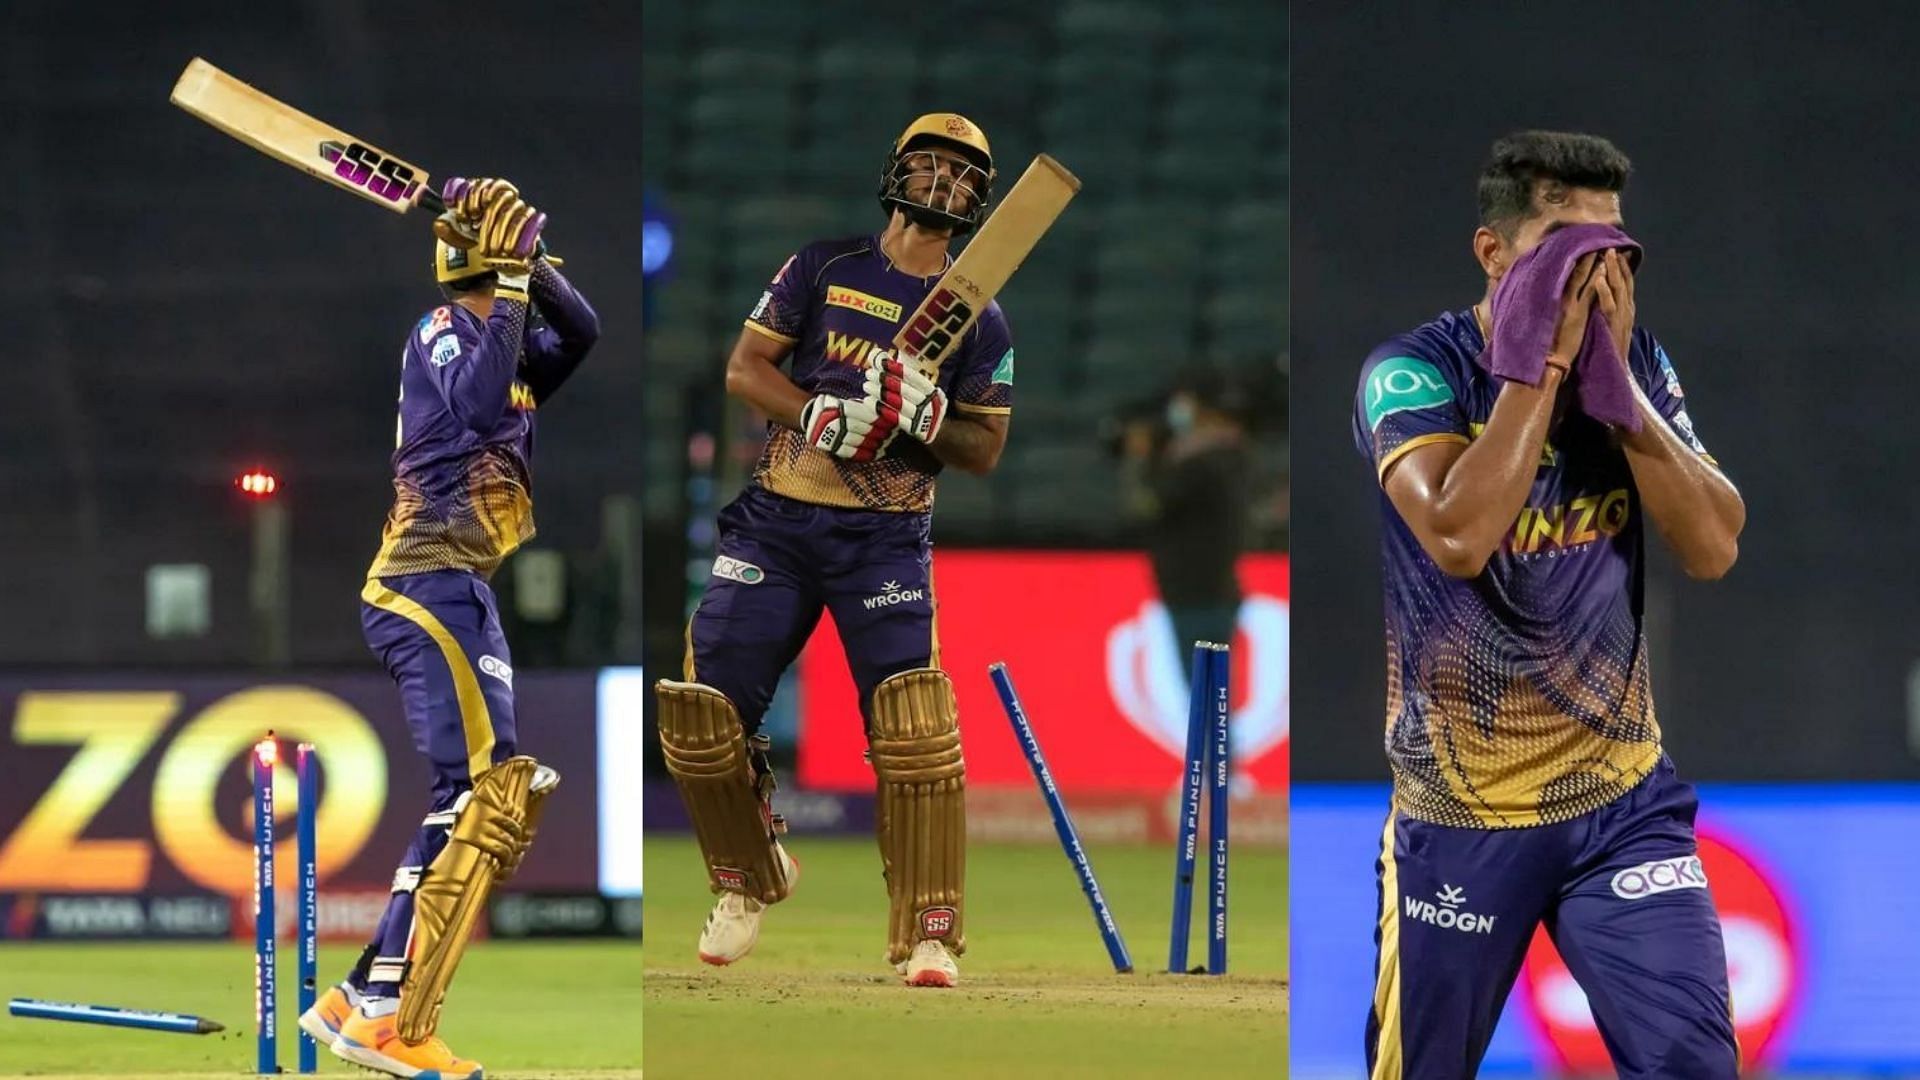 Kevin Pietersen feels KKR dug themselves a hole by making too many changes. (P.C.:iplt20.com)